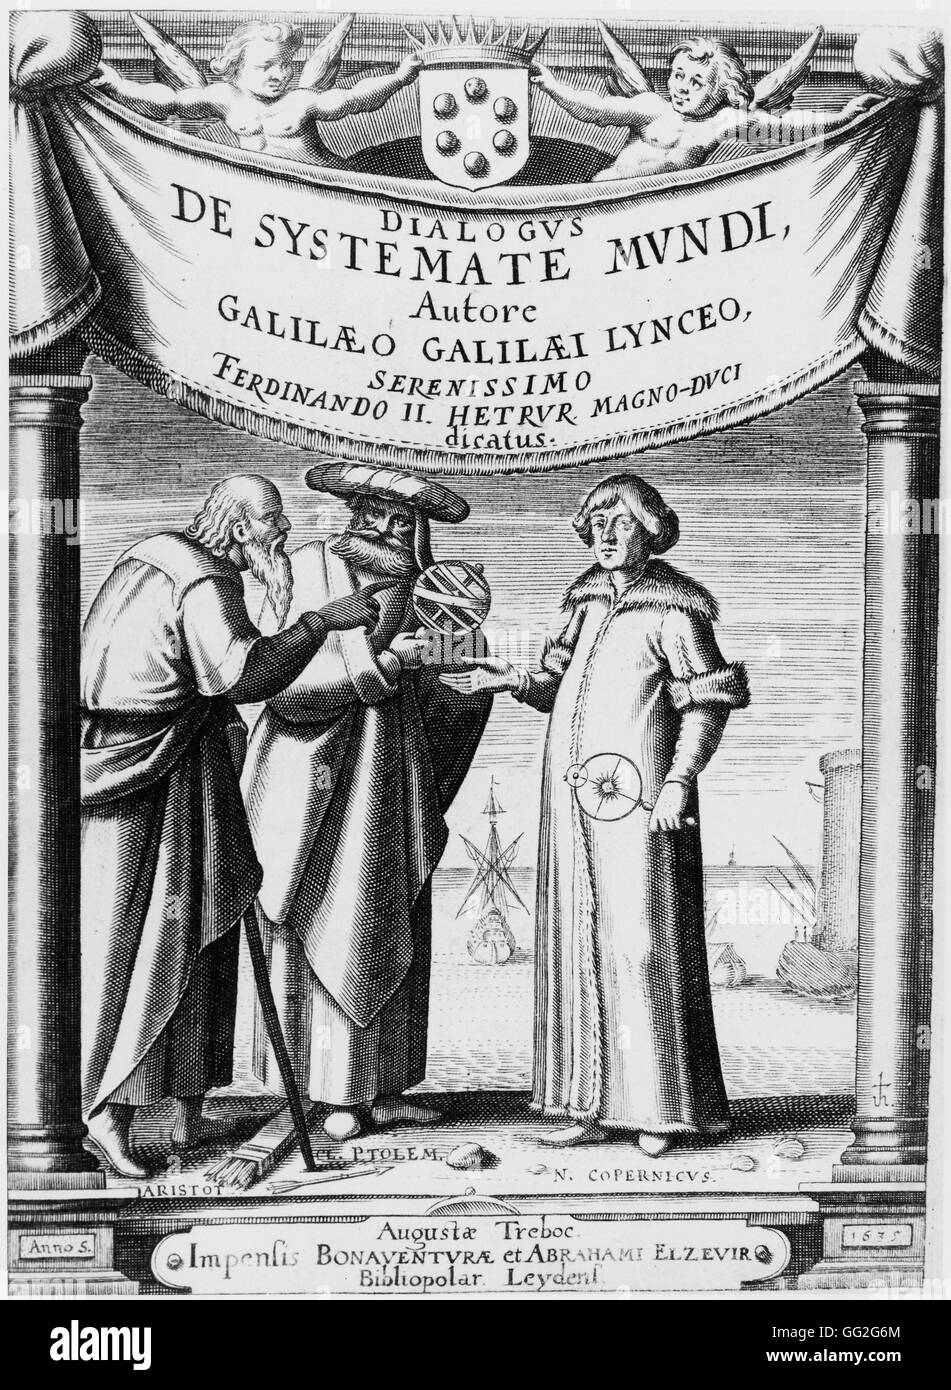 Frontipiece of 'Dialogue Concerning the Two Chief World Systems' (dialogo sopra i due massimi sistemi del mondo), written by Galileo in 1632. From left to right: Aristotle, Ptolemy and Copernicus. Engraving Paris, Bibliothèque de l'Observatoire Stock Photo